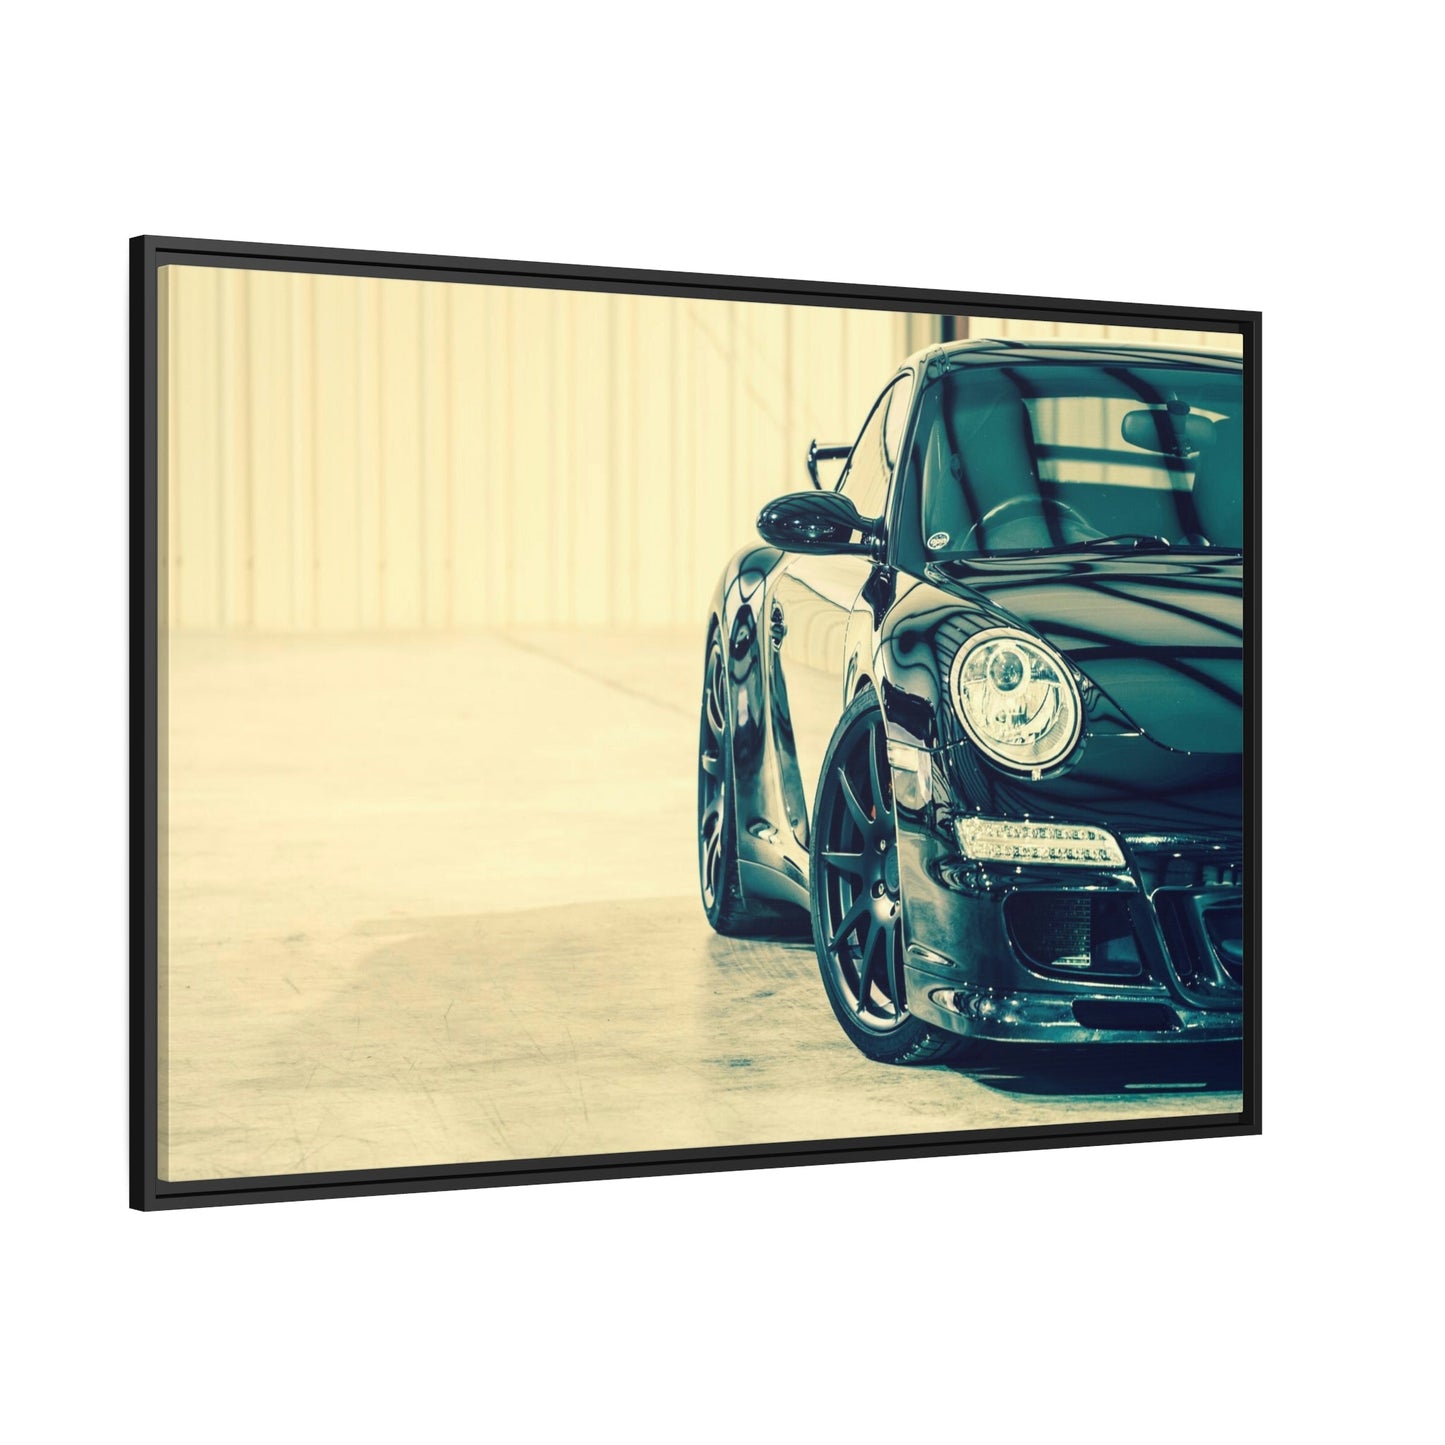 The Art of Speed: A Beautiful Framed Canvas & Poster Print of a Porsche in Motion